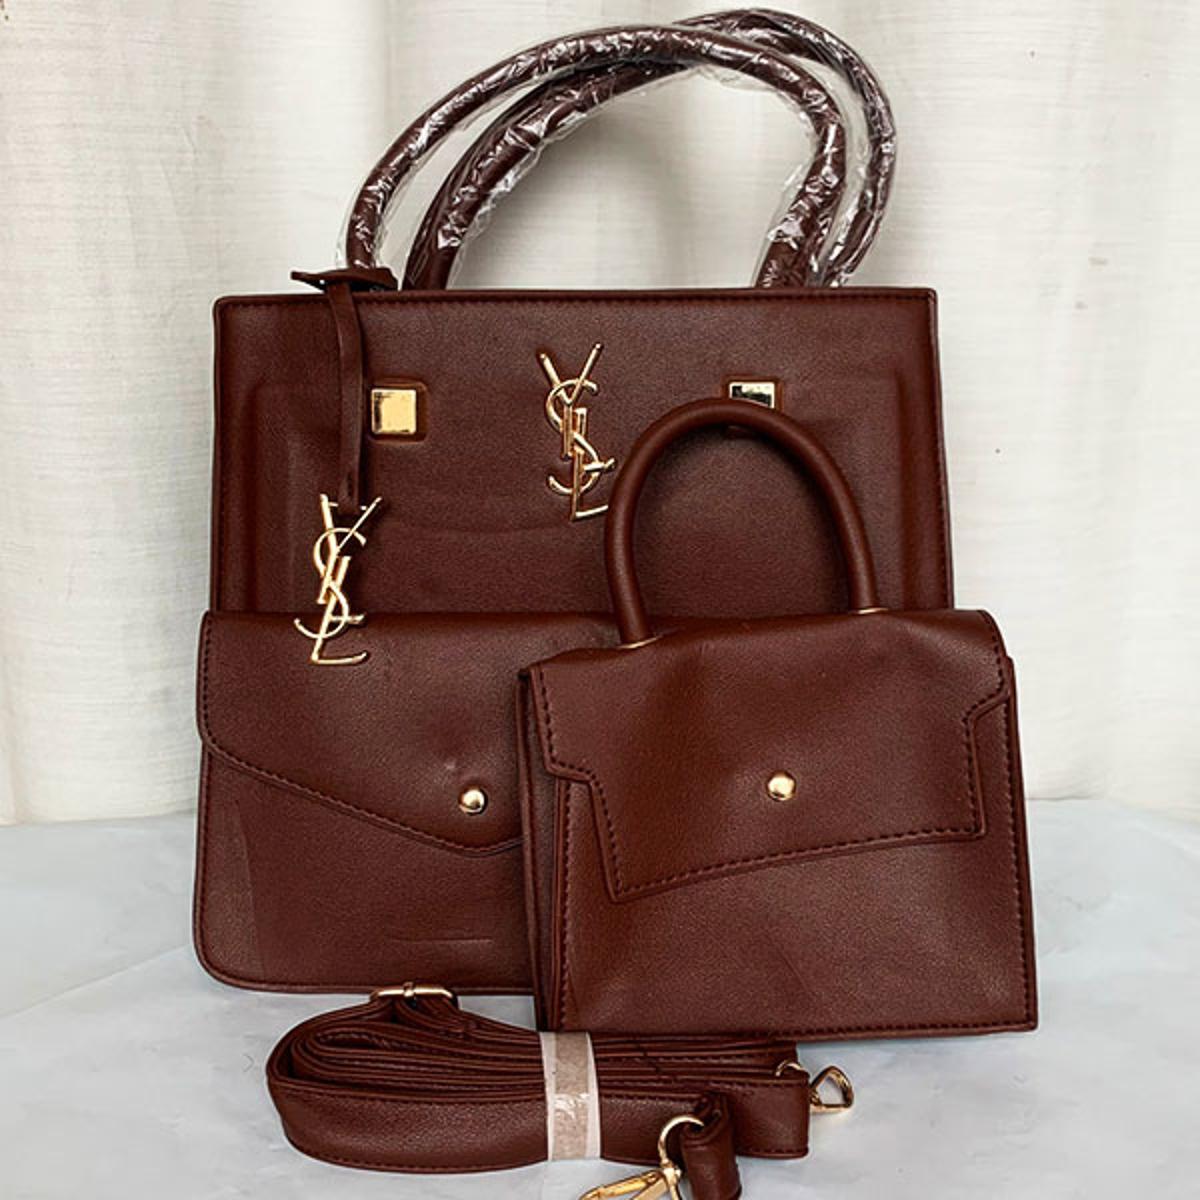 Buy online Ysl Bag With Keychain In Pakistan, Rs 7500